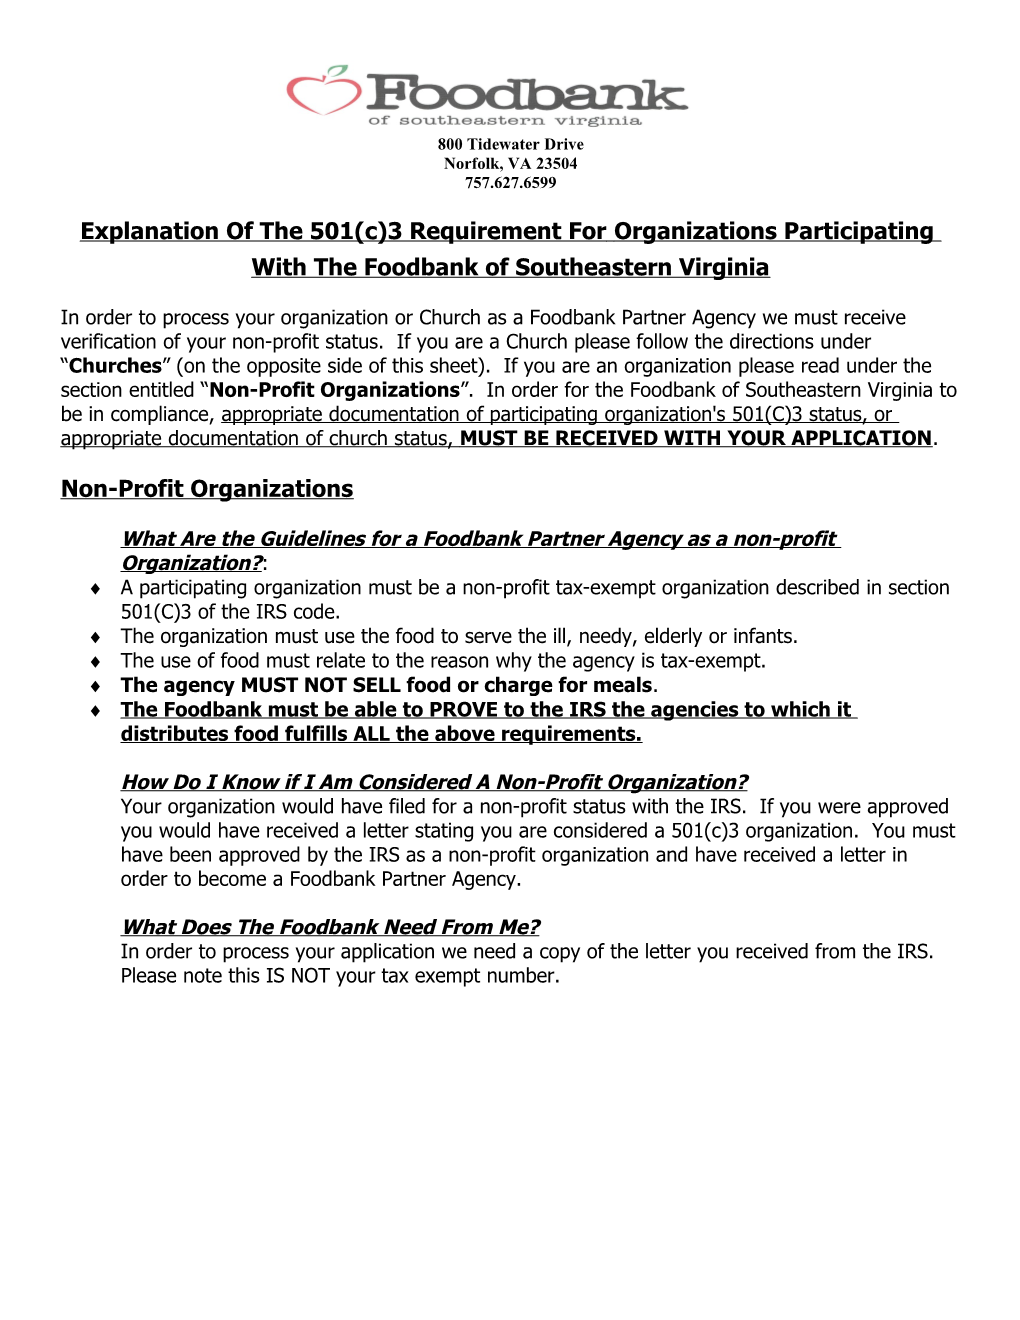 Explanation of the 501(C)3 Requirement Fororganizations Participating